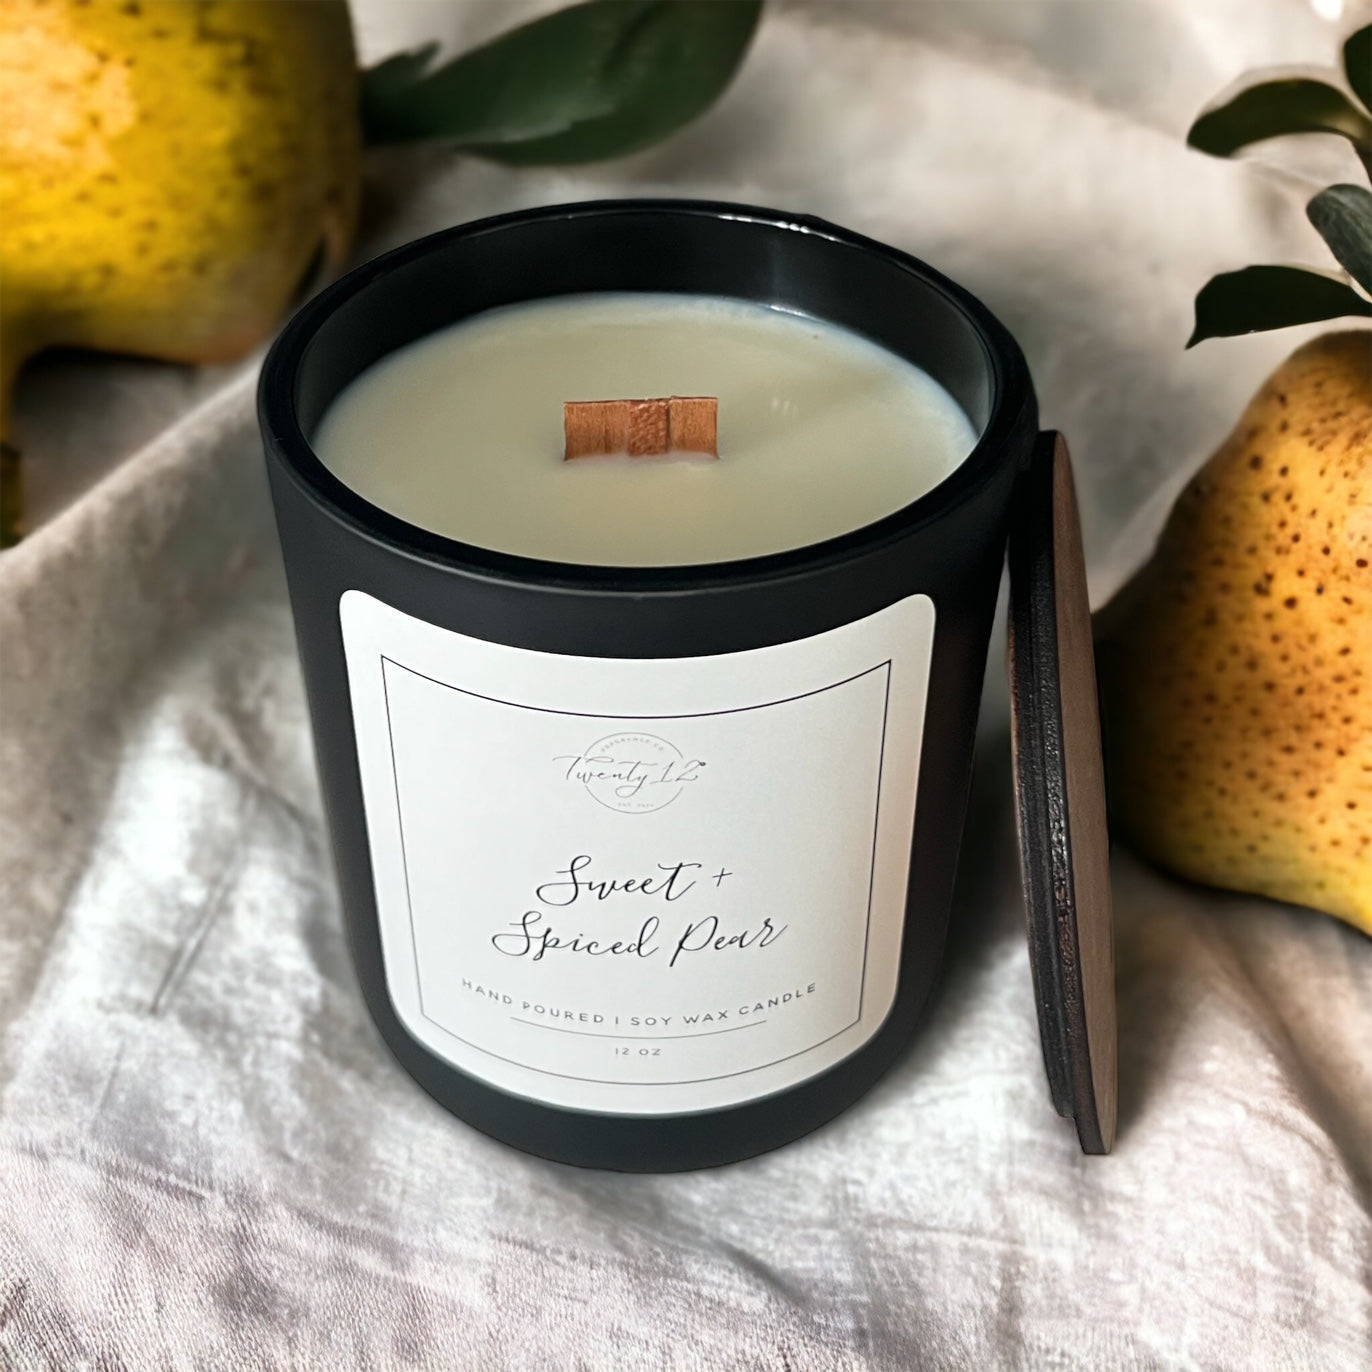 Sweet + Spiced Pear Candle